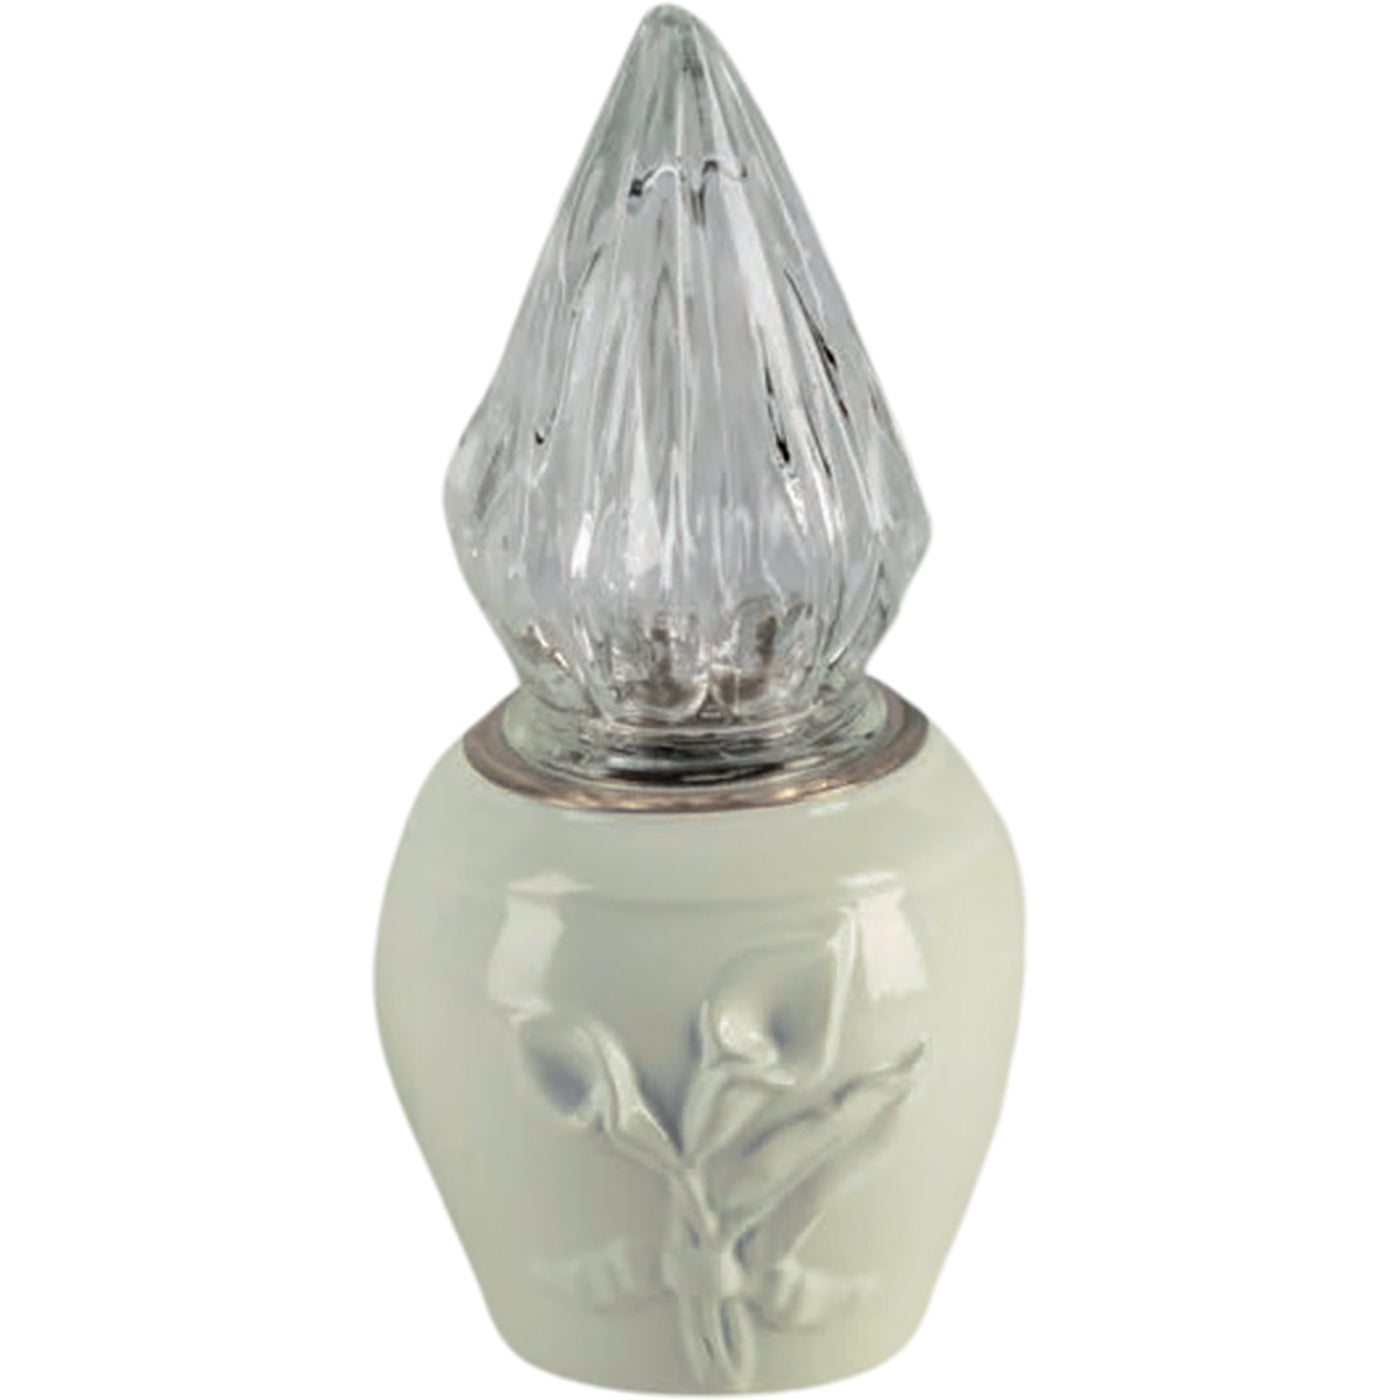 Grave light Calla ivory 10x10cm - 3.9x3.9in In ivory porcelain, ground attached CAL164T/A